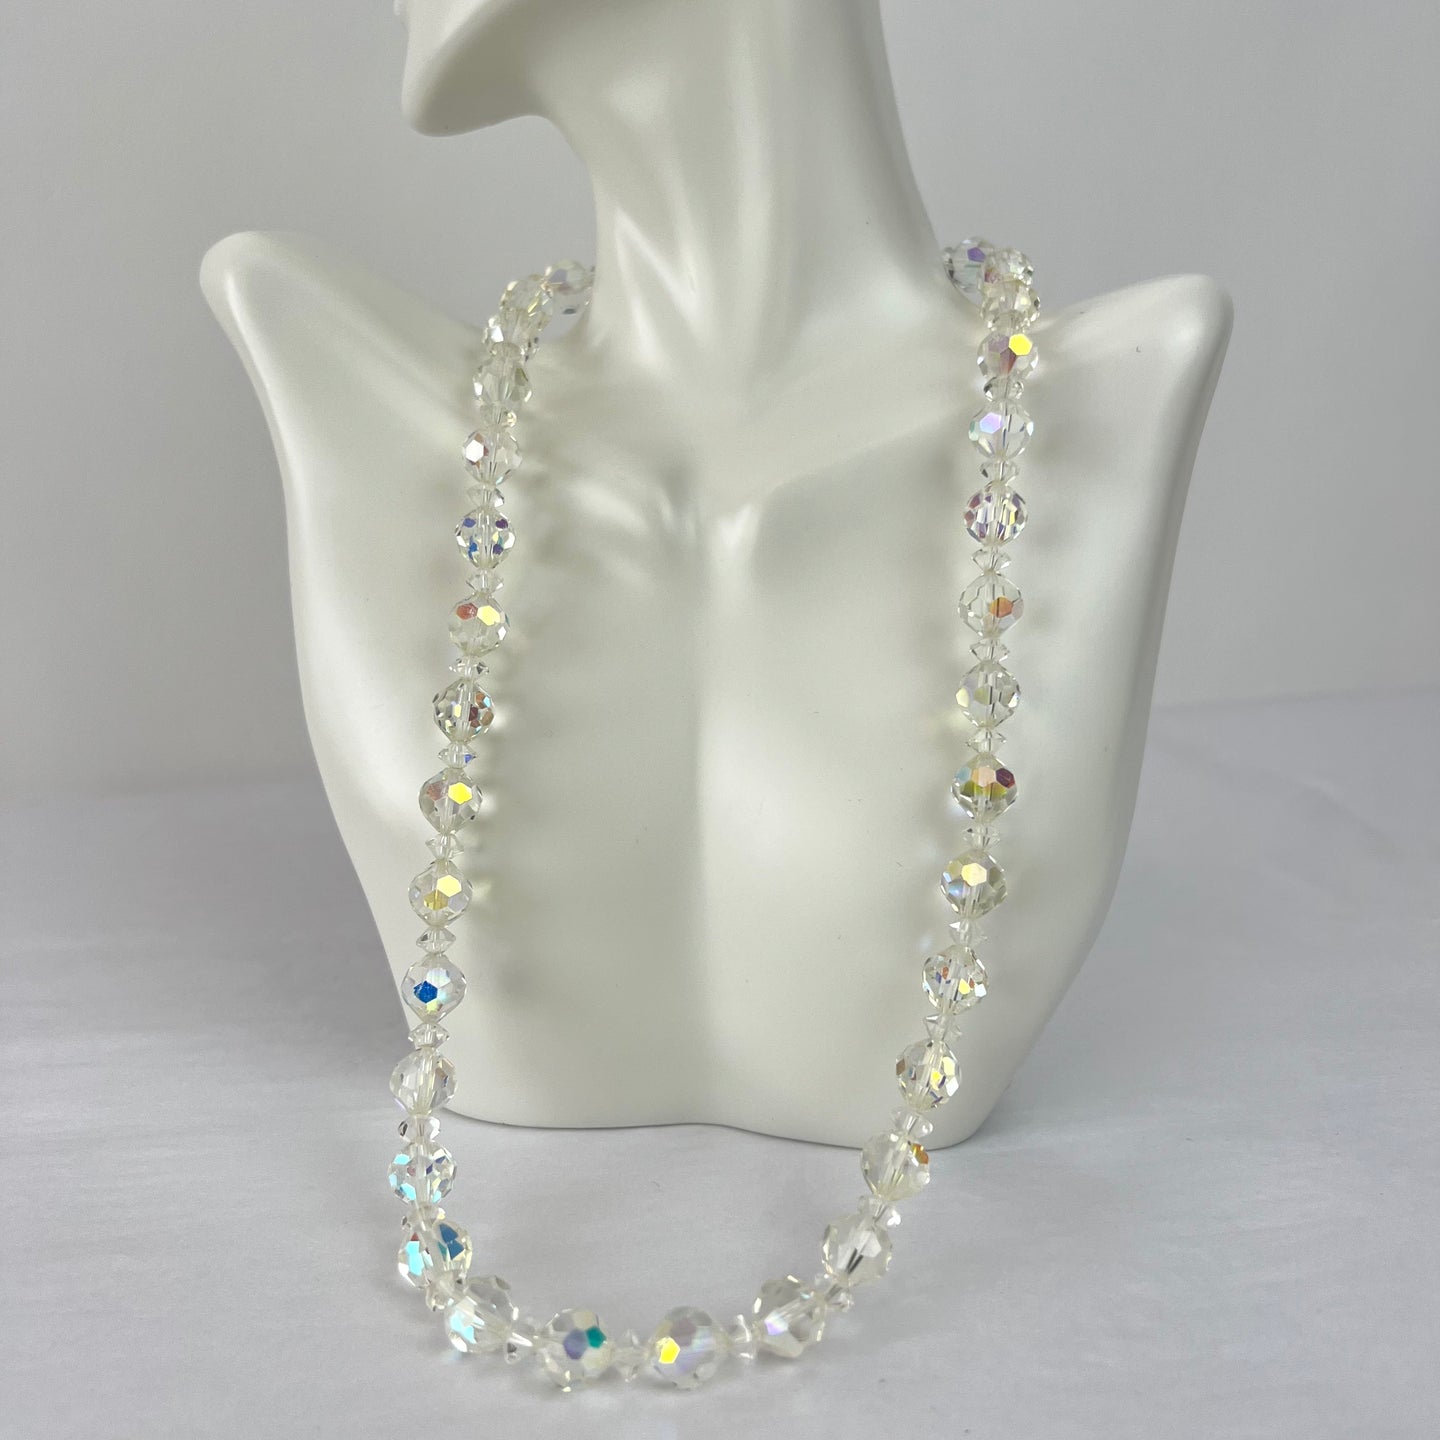 Vintage 50s Aurora Borealis Beaded Necklace with Extension